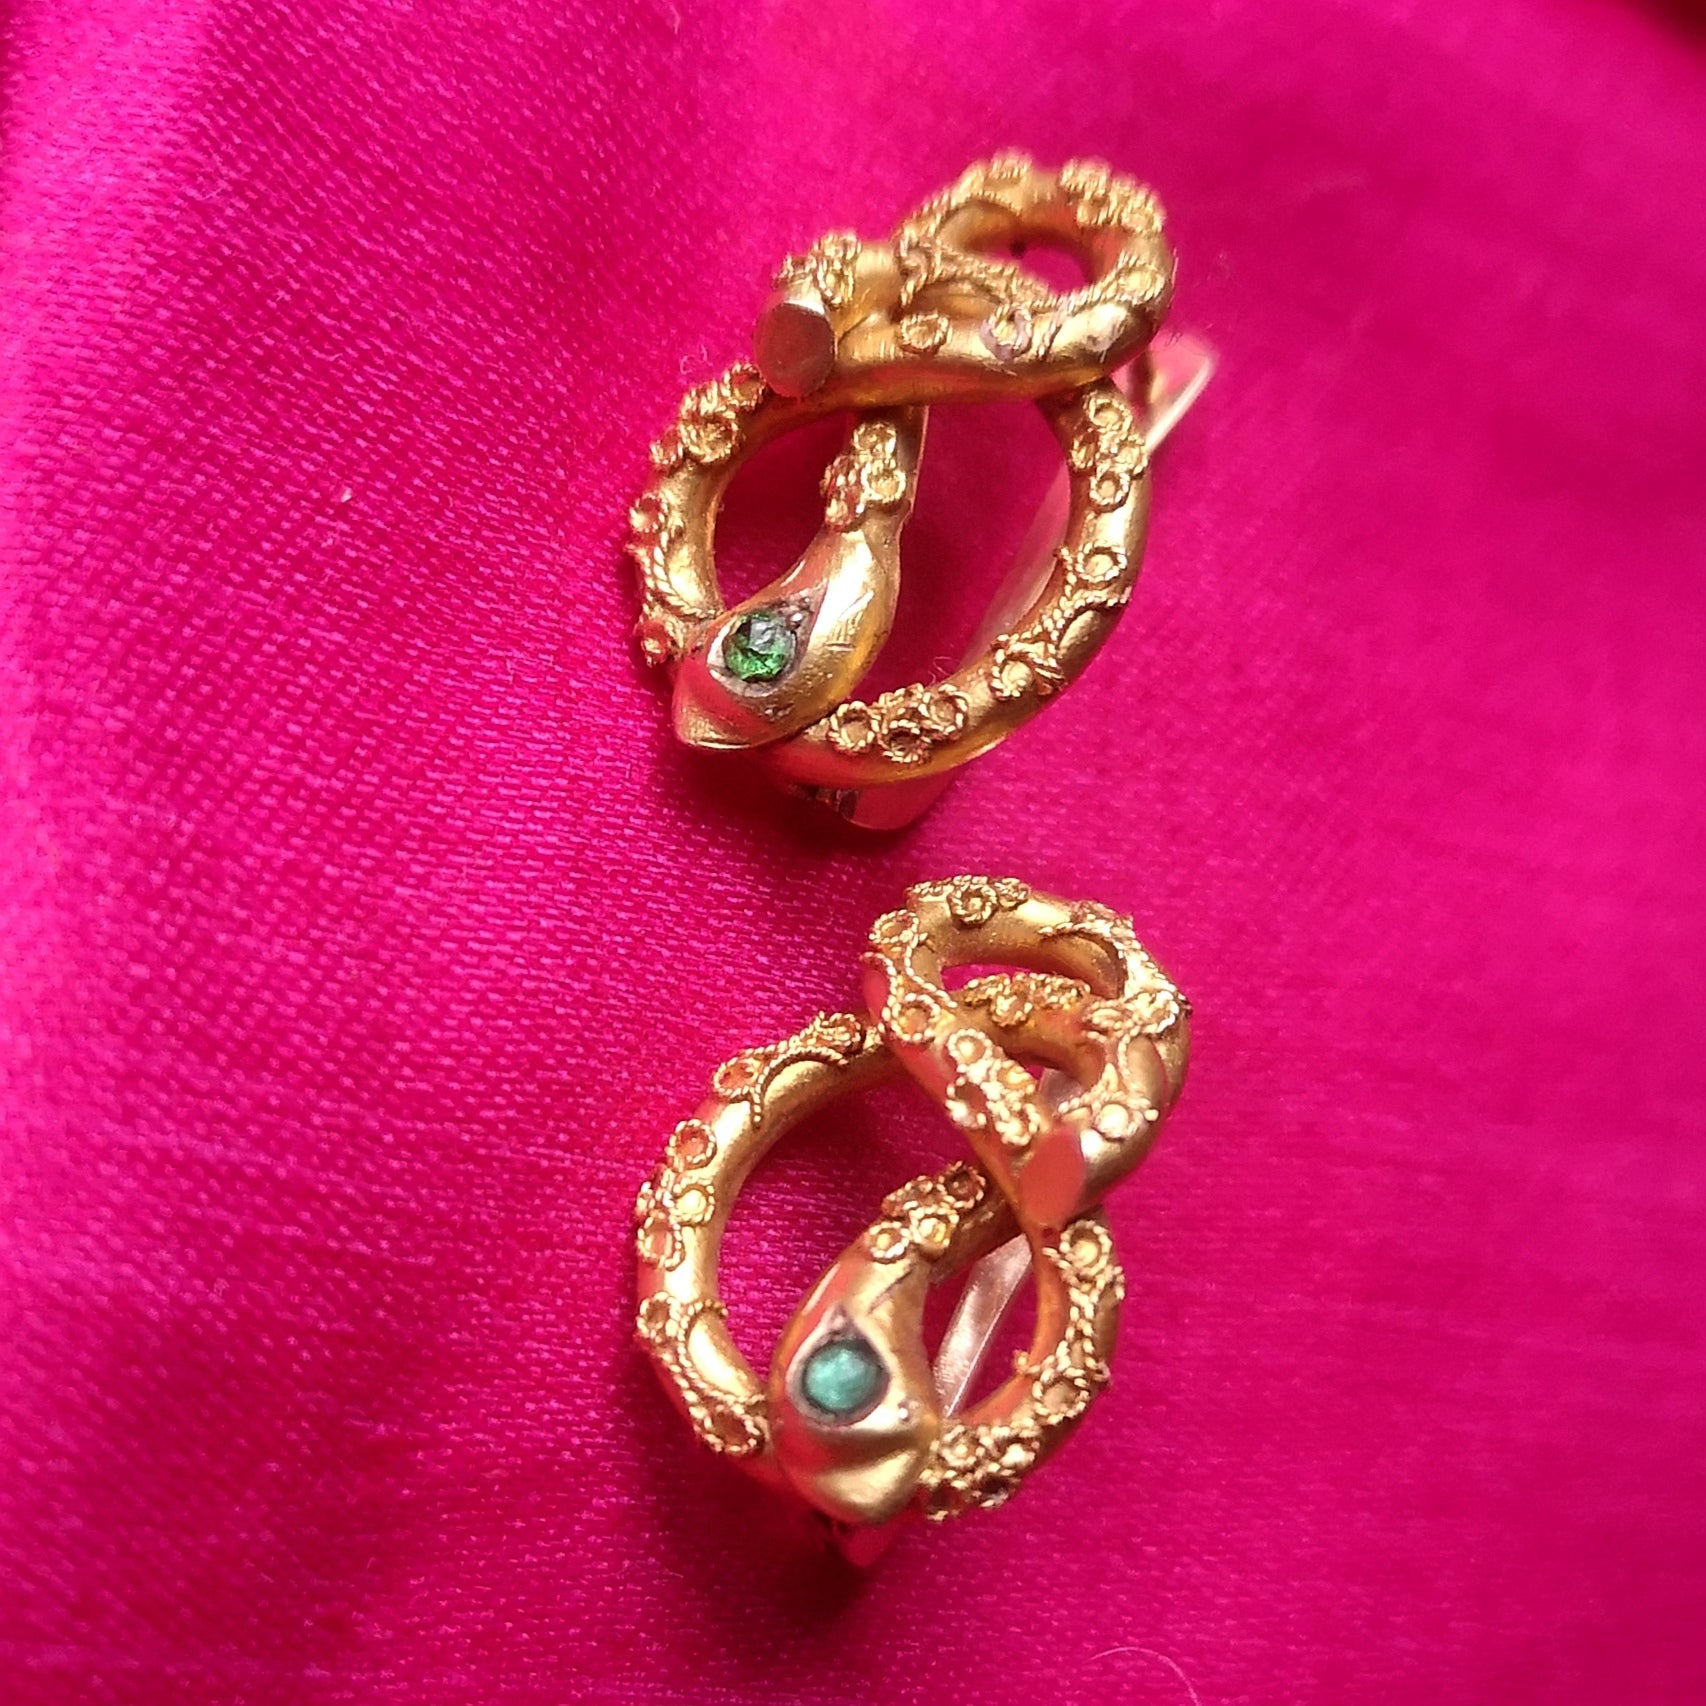 The Victorian serpent earrings - Medea's Mix